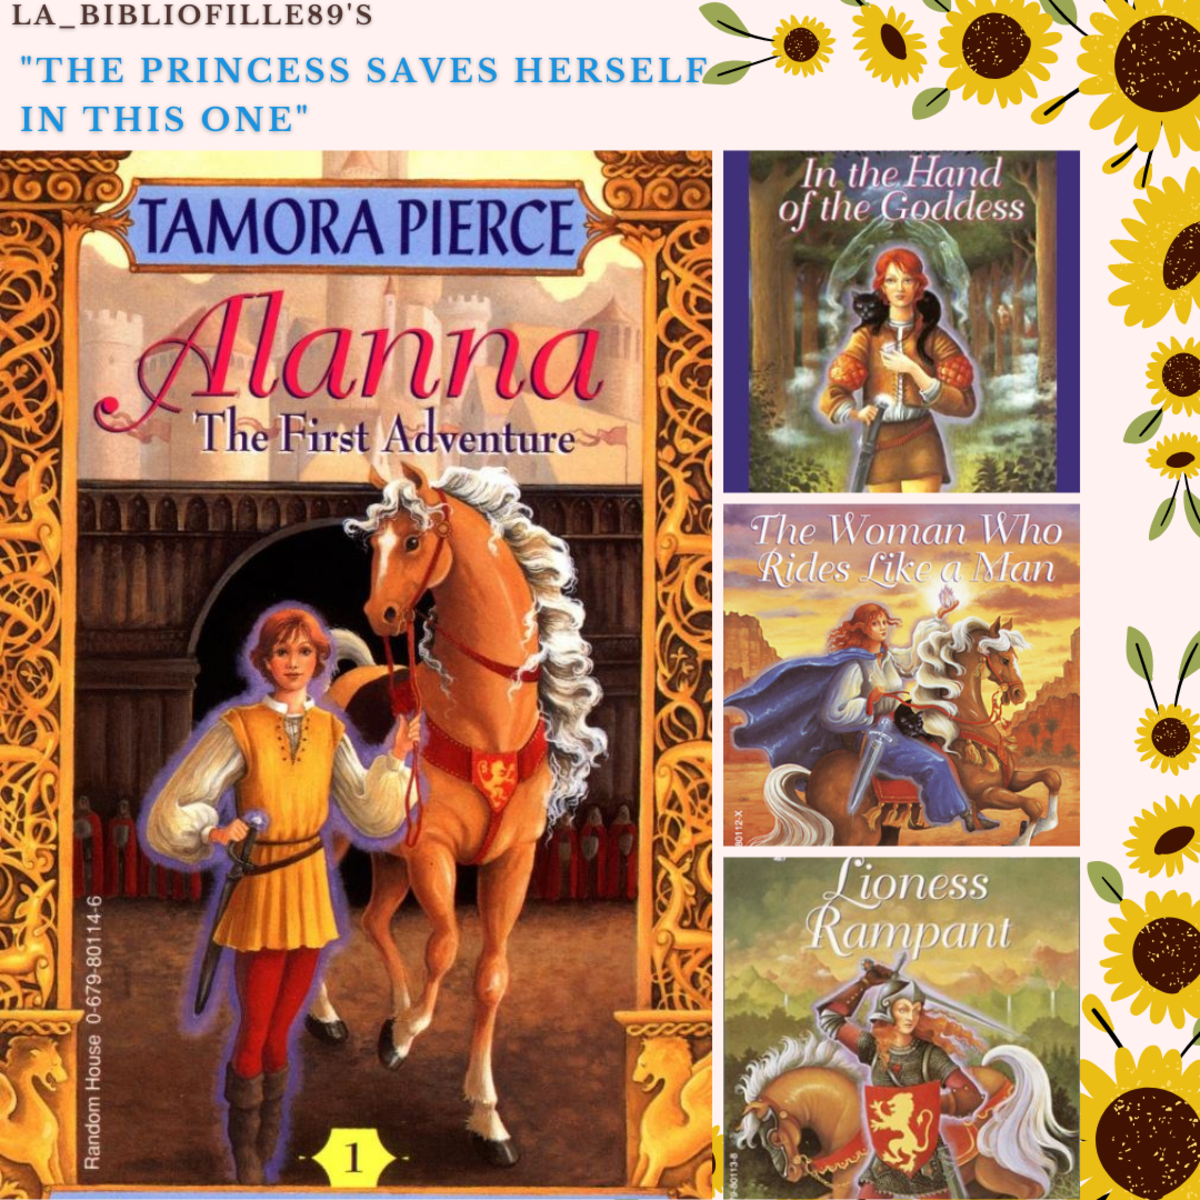 The Princess Saves Herself : 3 Princess-Warrior Series to Read or Re-read